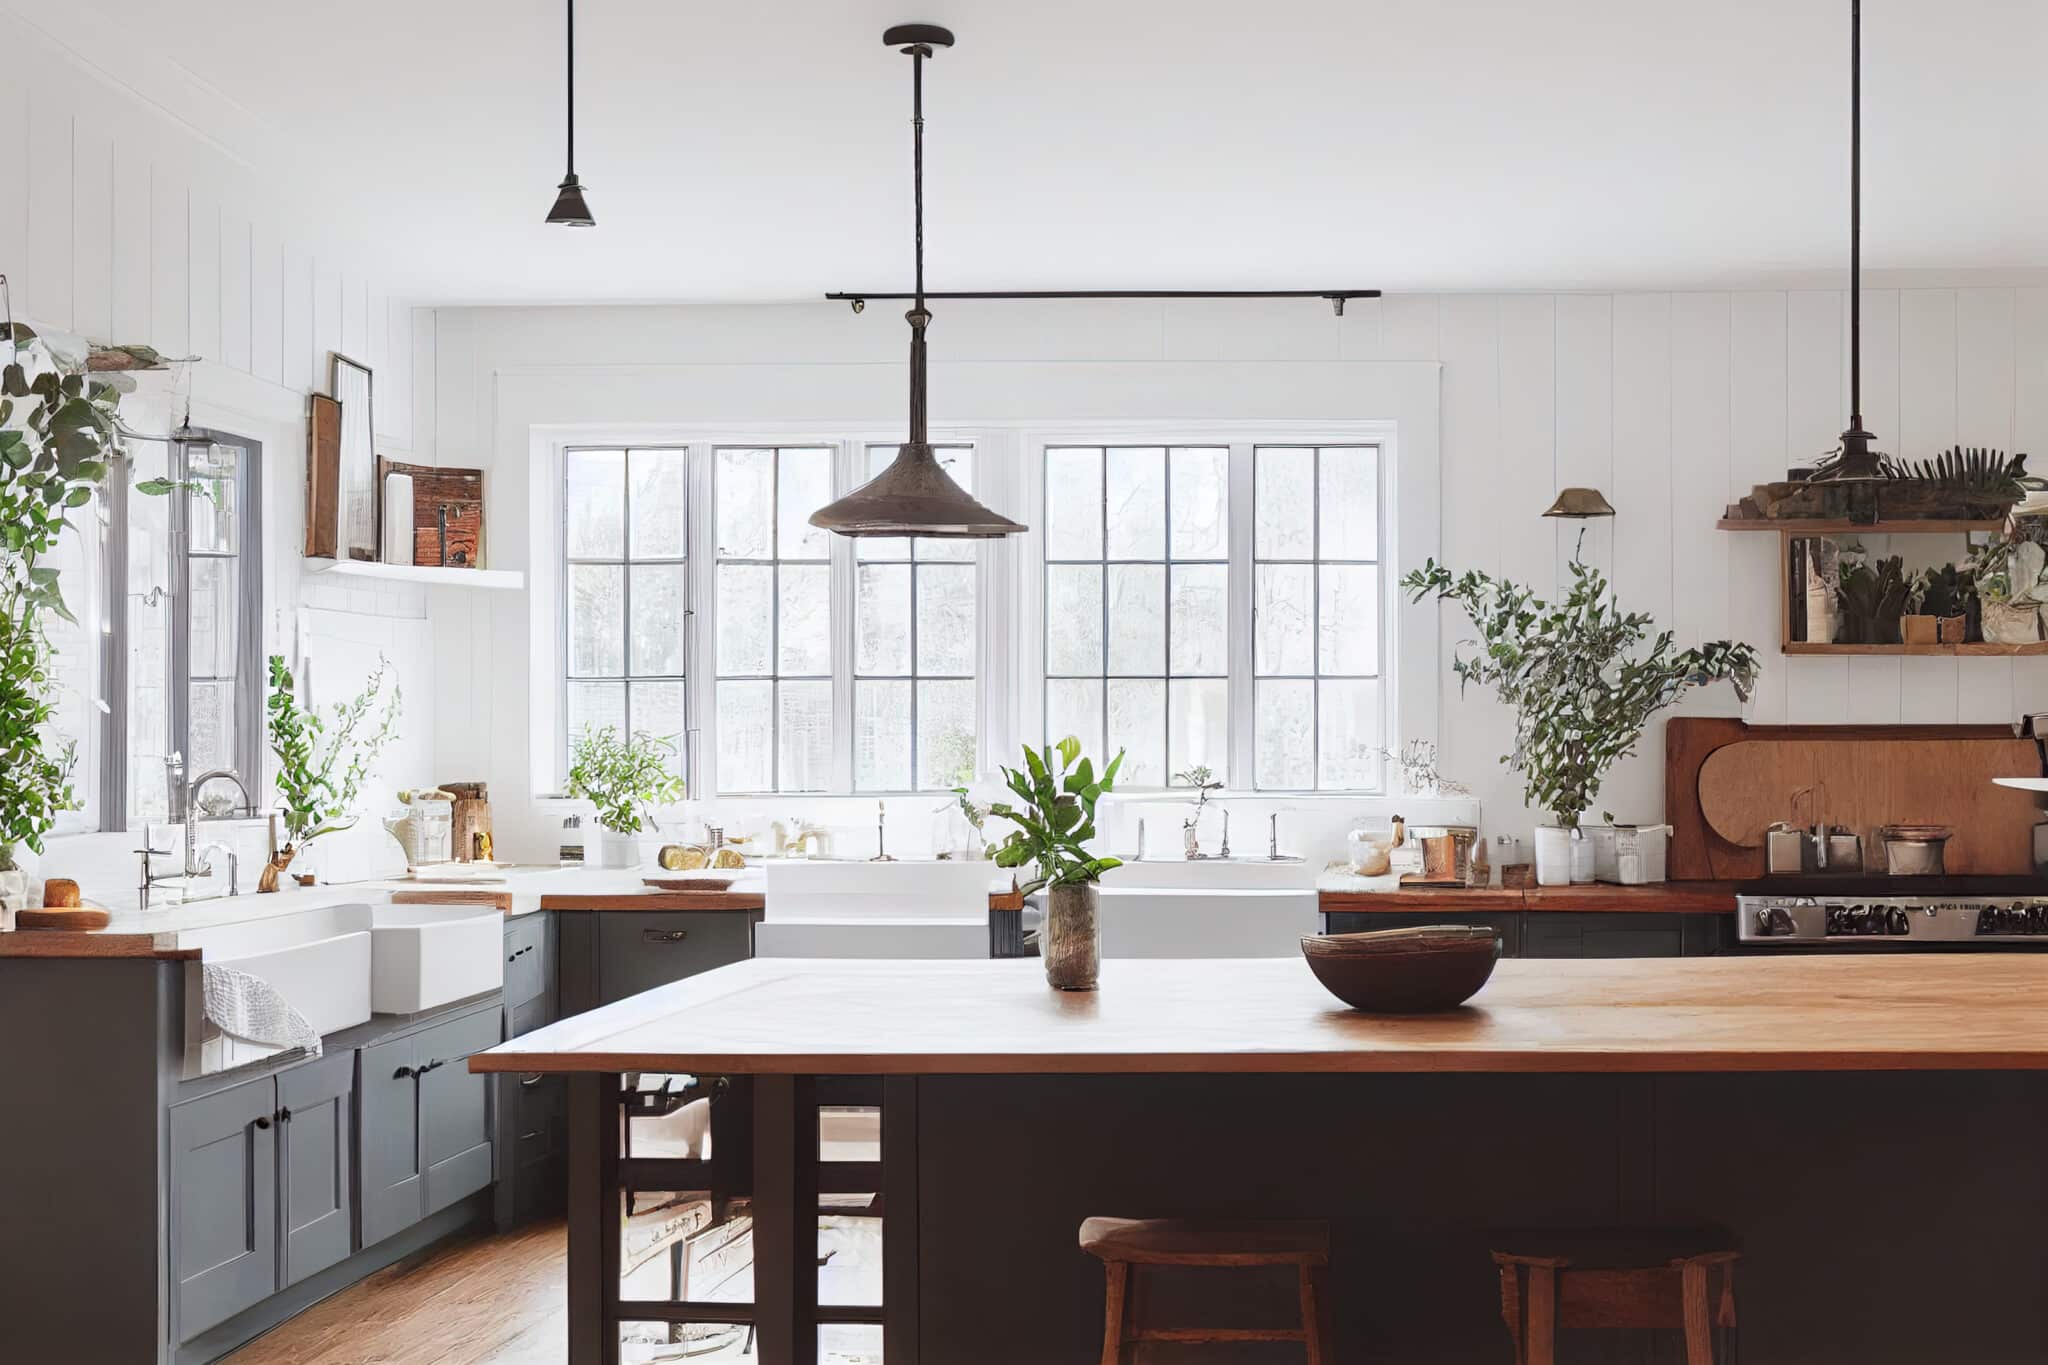 How to Add Space to a Kitchen